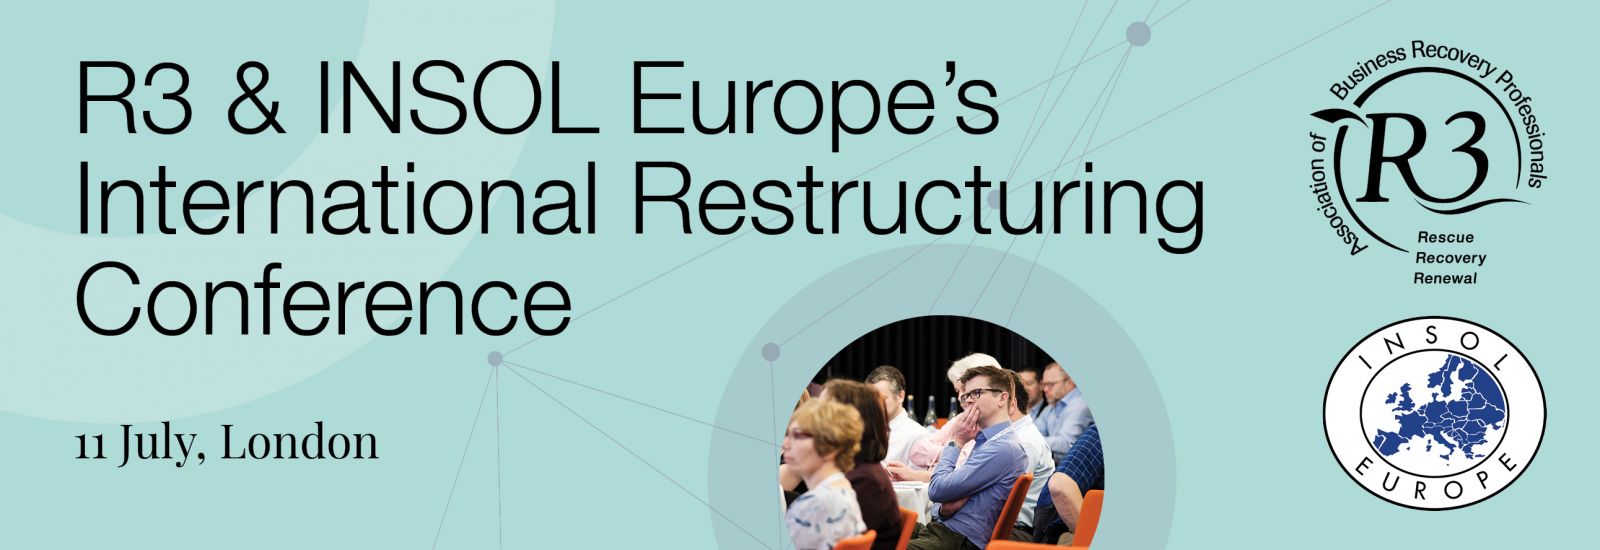 R3 & INSOL Europe's International Restructuring Conference